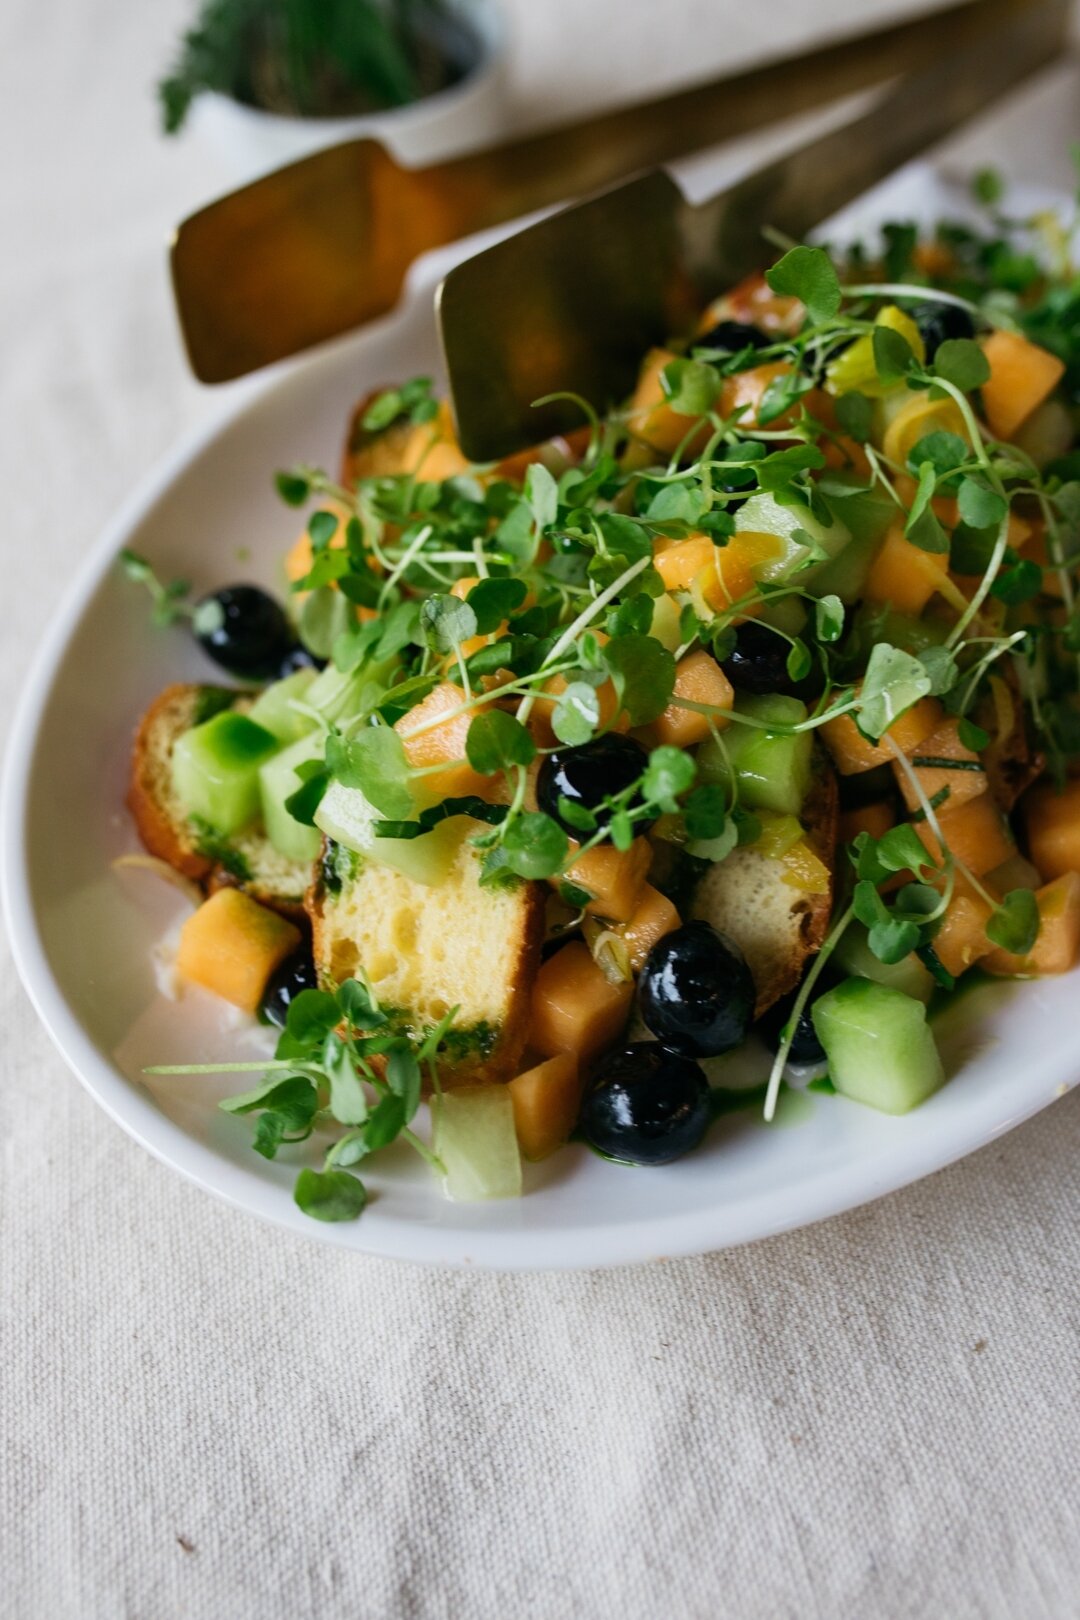 Every bite tells a story in our Melon and Blueberry Salad with Honey Lemon Confit, Brioche Croutons, Watercress, and Sweet Onions #homespunatl
 
Photo by @morganbeatton